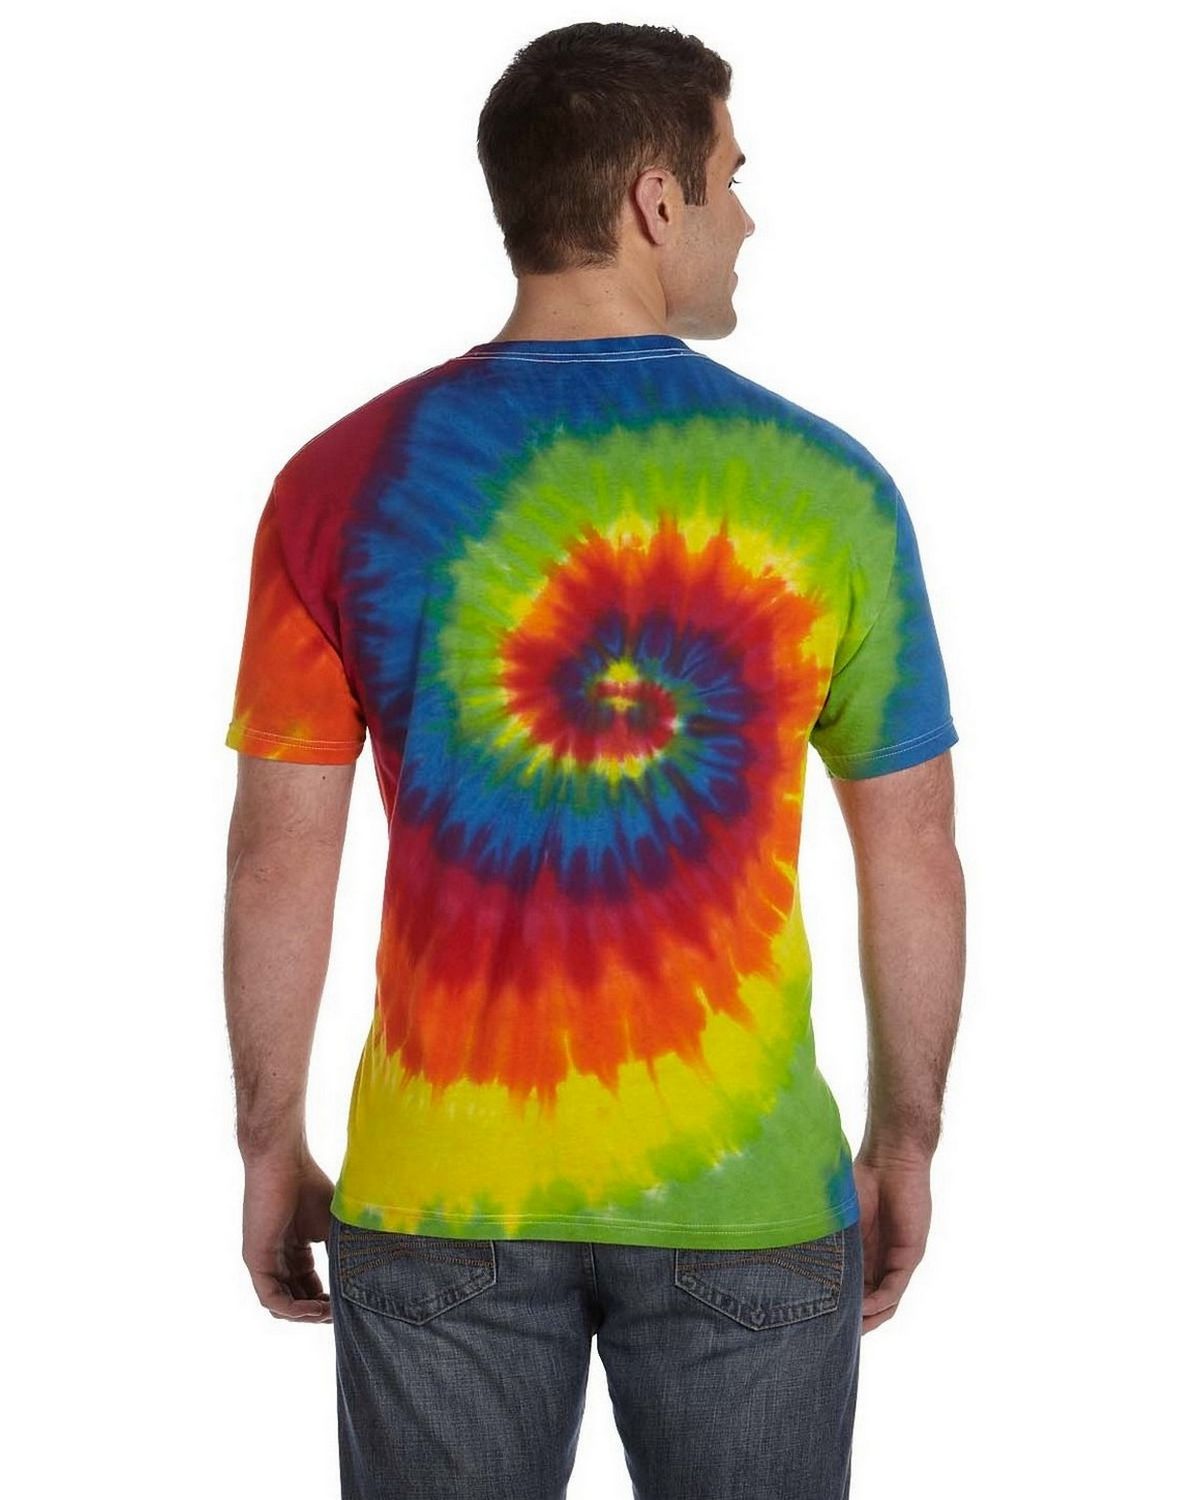 Download Tie-Dye CD100 Adult Cotton Tie-Dyed T-Shirt